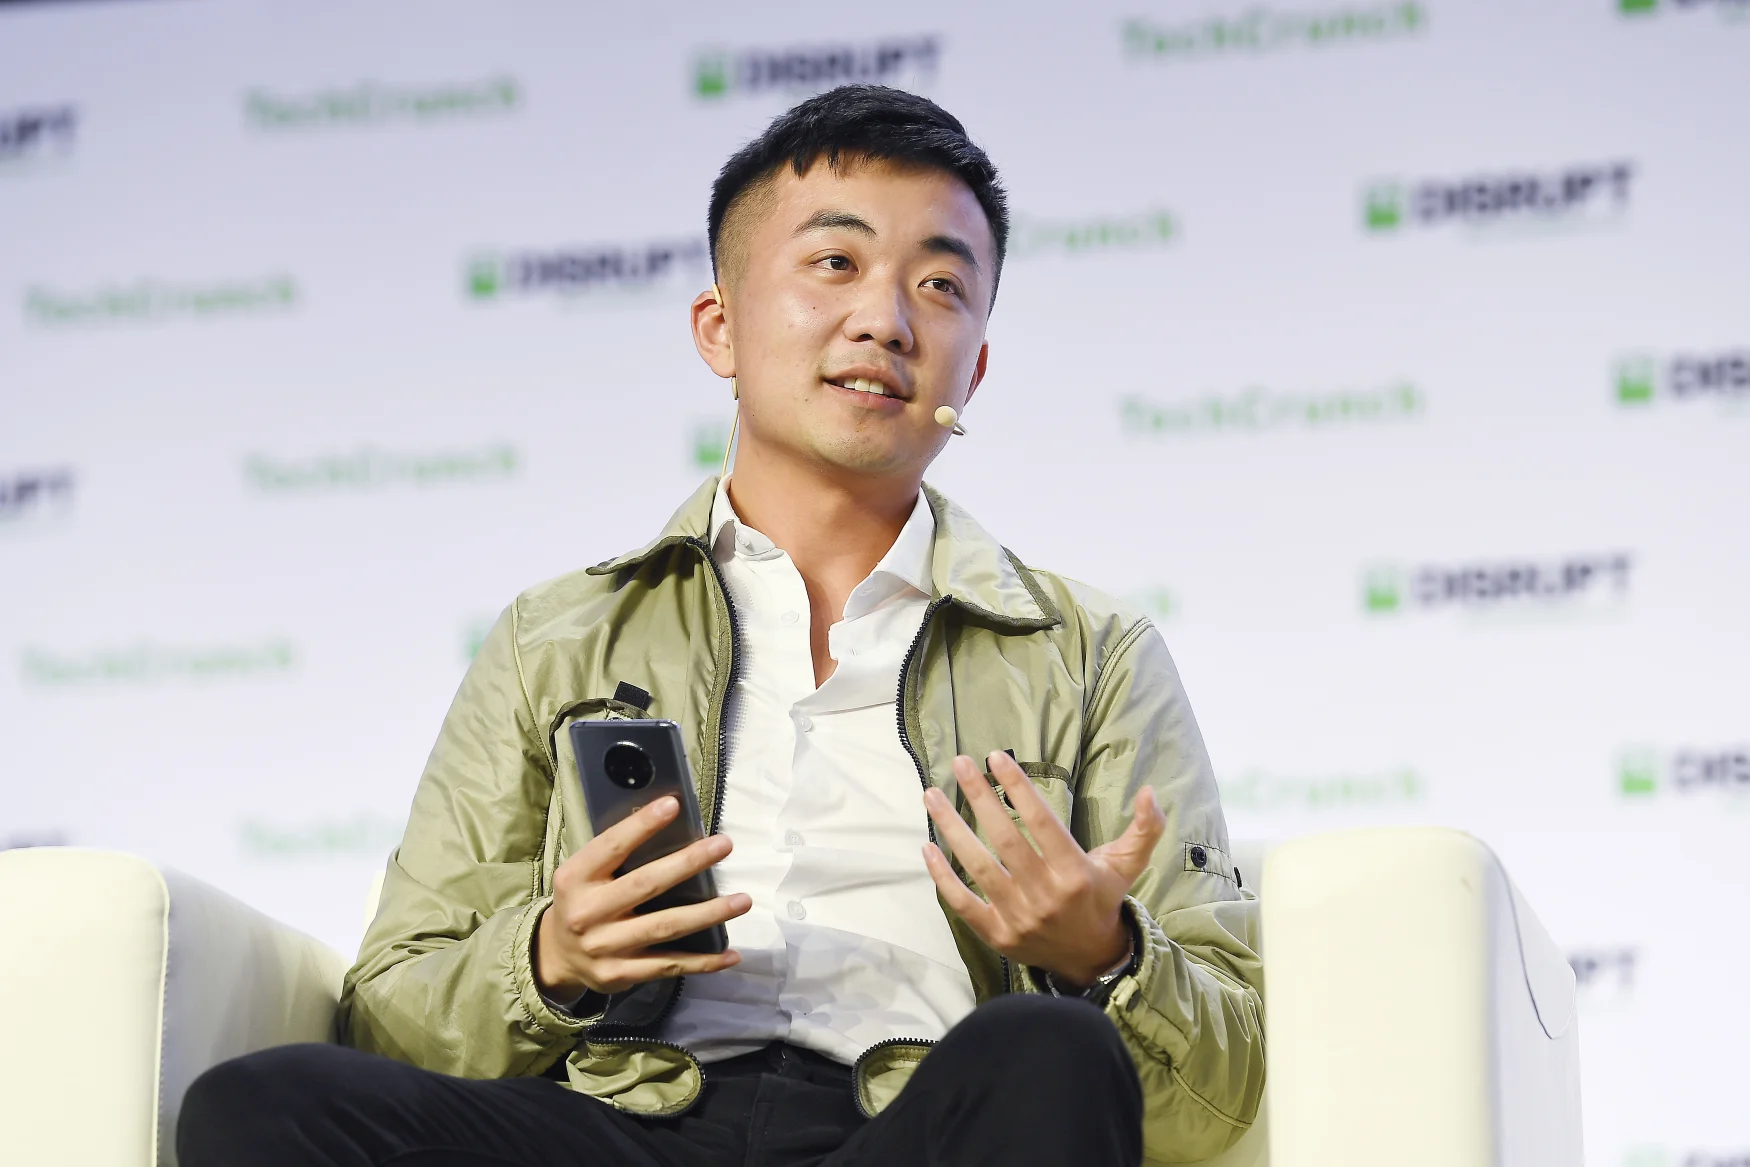 SAN FRANCISCO, CALIFORNIA - OCTOBER 04: OnePlus co-founder Carl Pei speaks on stage during TechCrunch Disrupt San Francisco 2019 at Moscone Convention Center on October 04, 2019 in San Francisco, California.  (Photo by Steve Jennings/Getty Images for TechCrunch)